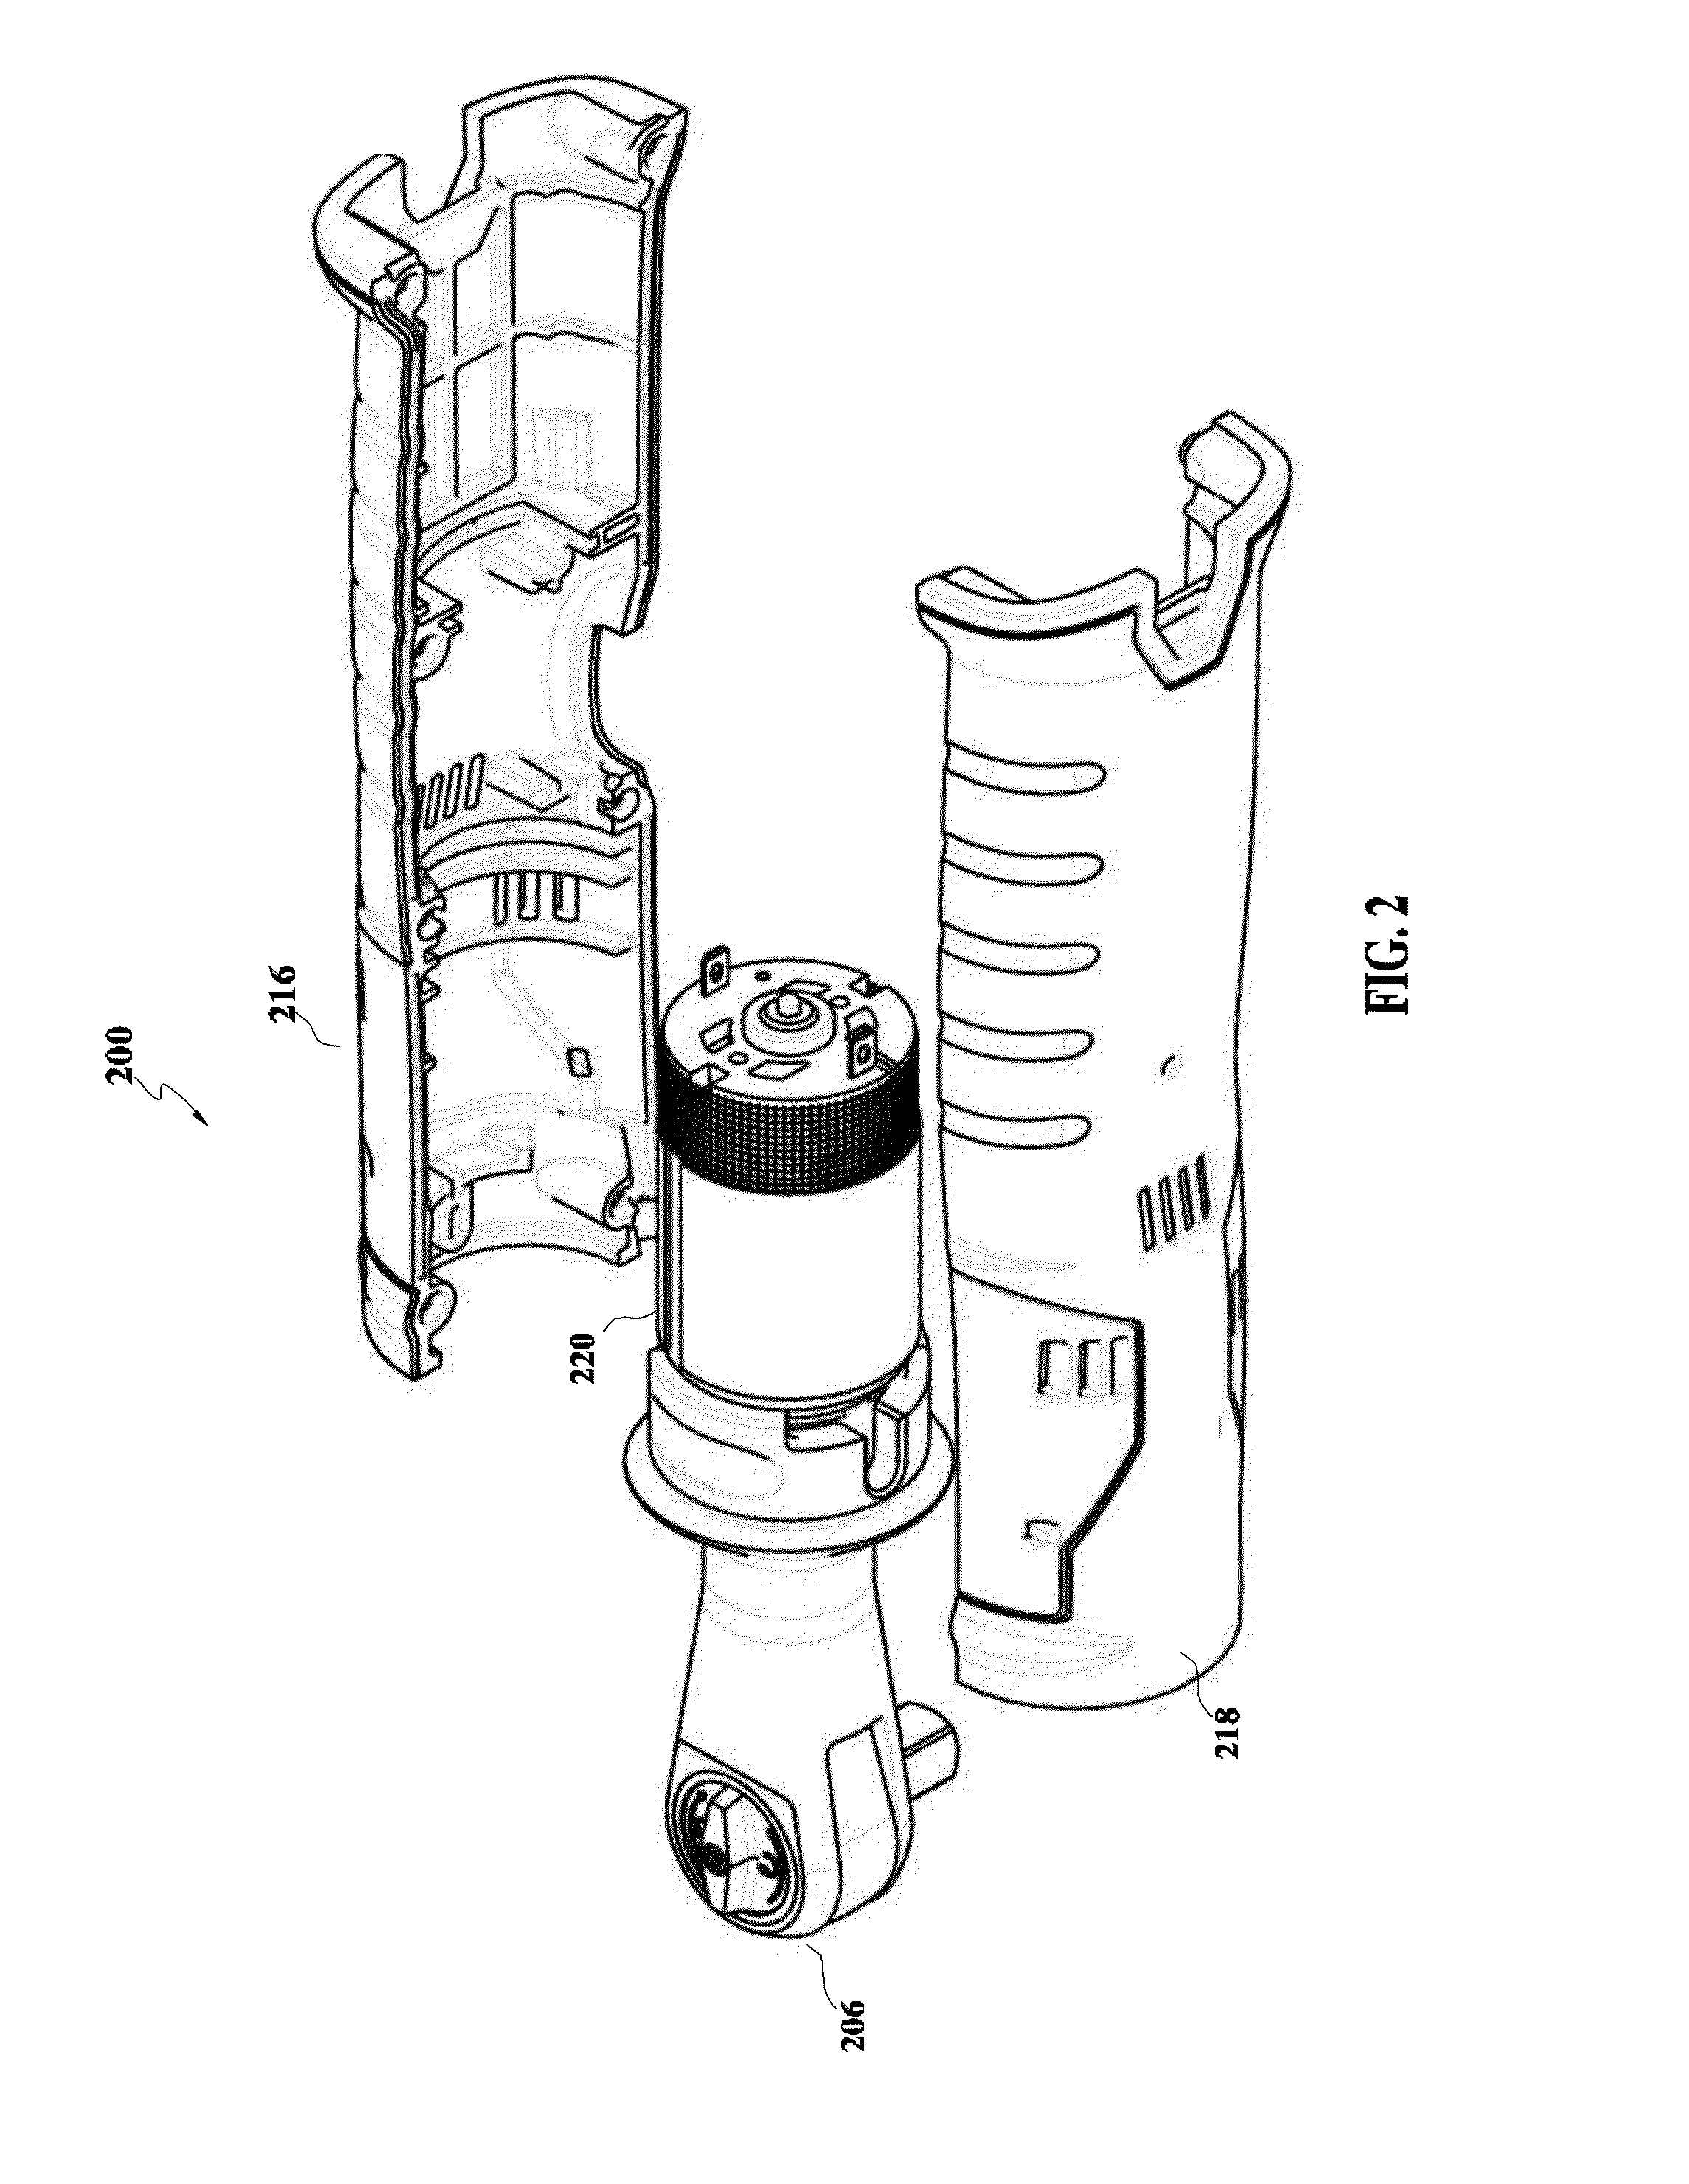 Hand Tool Head Assembly and Housing Apparatus